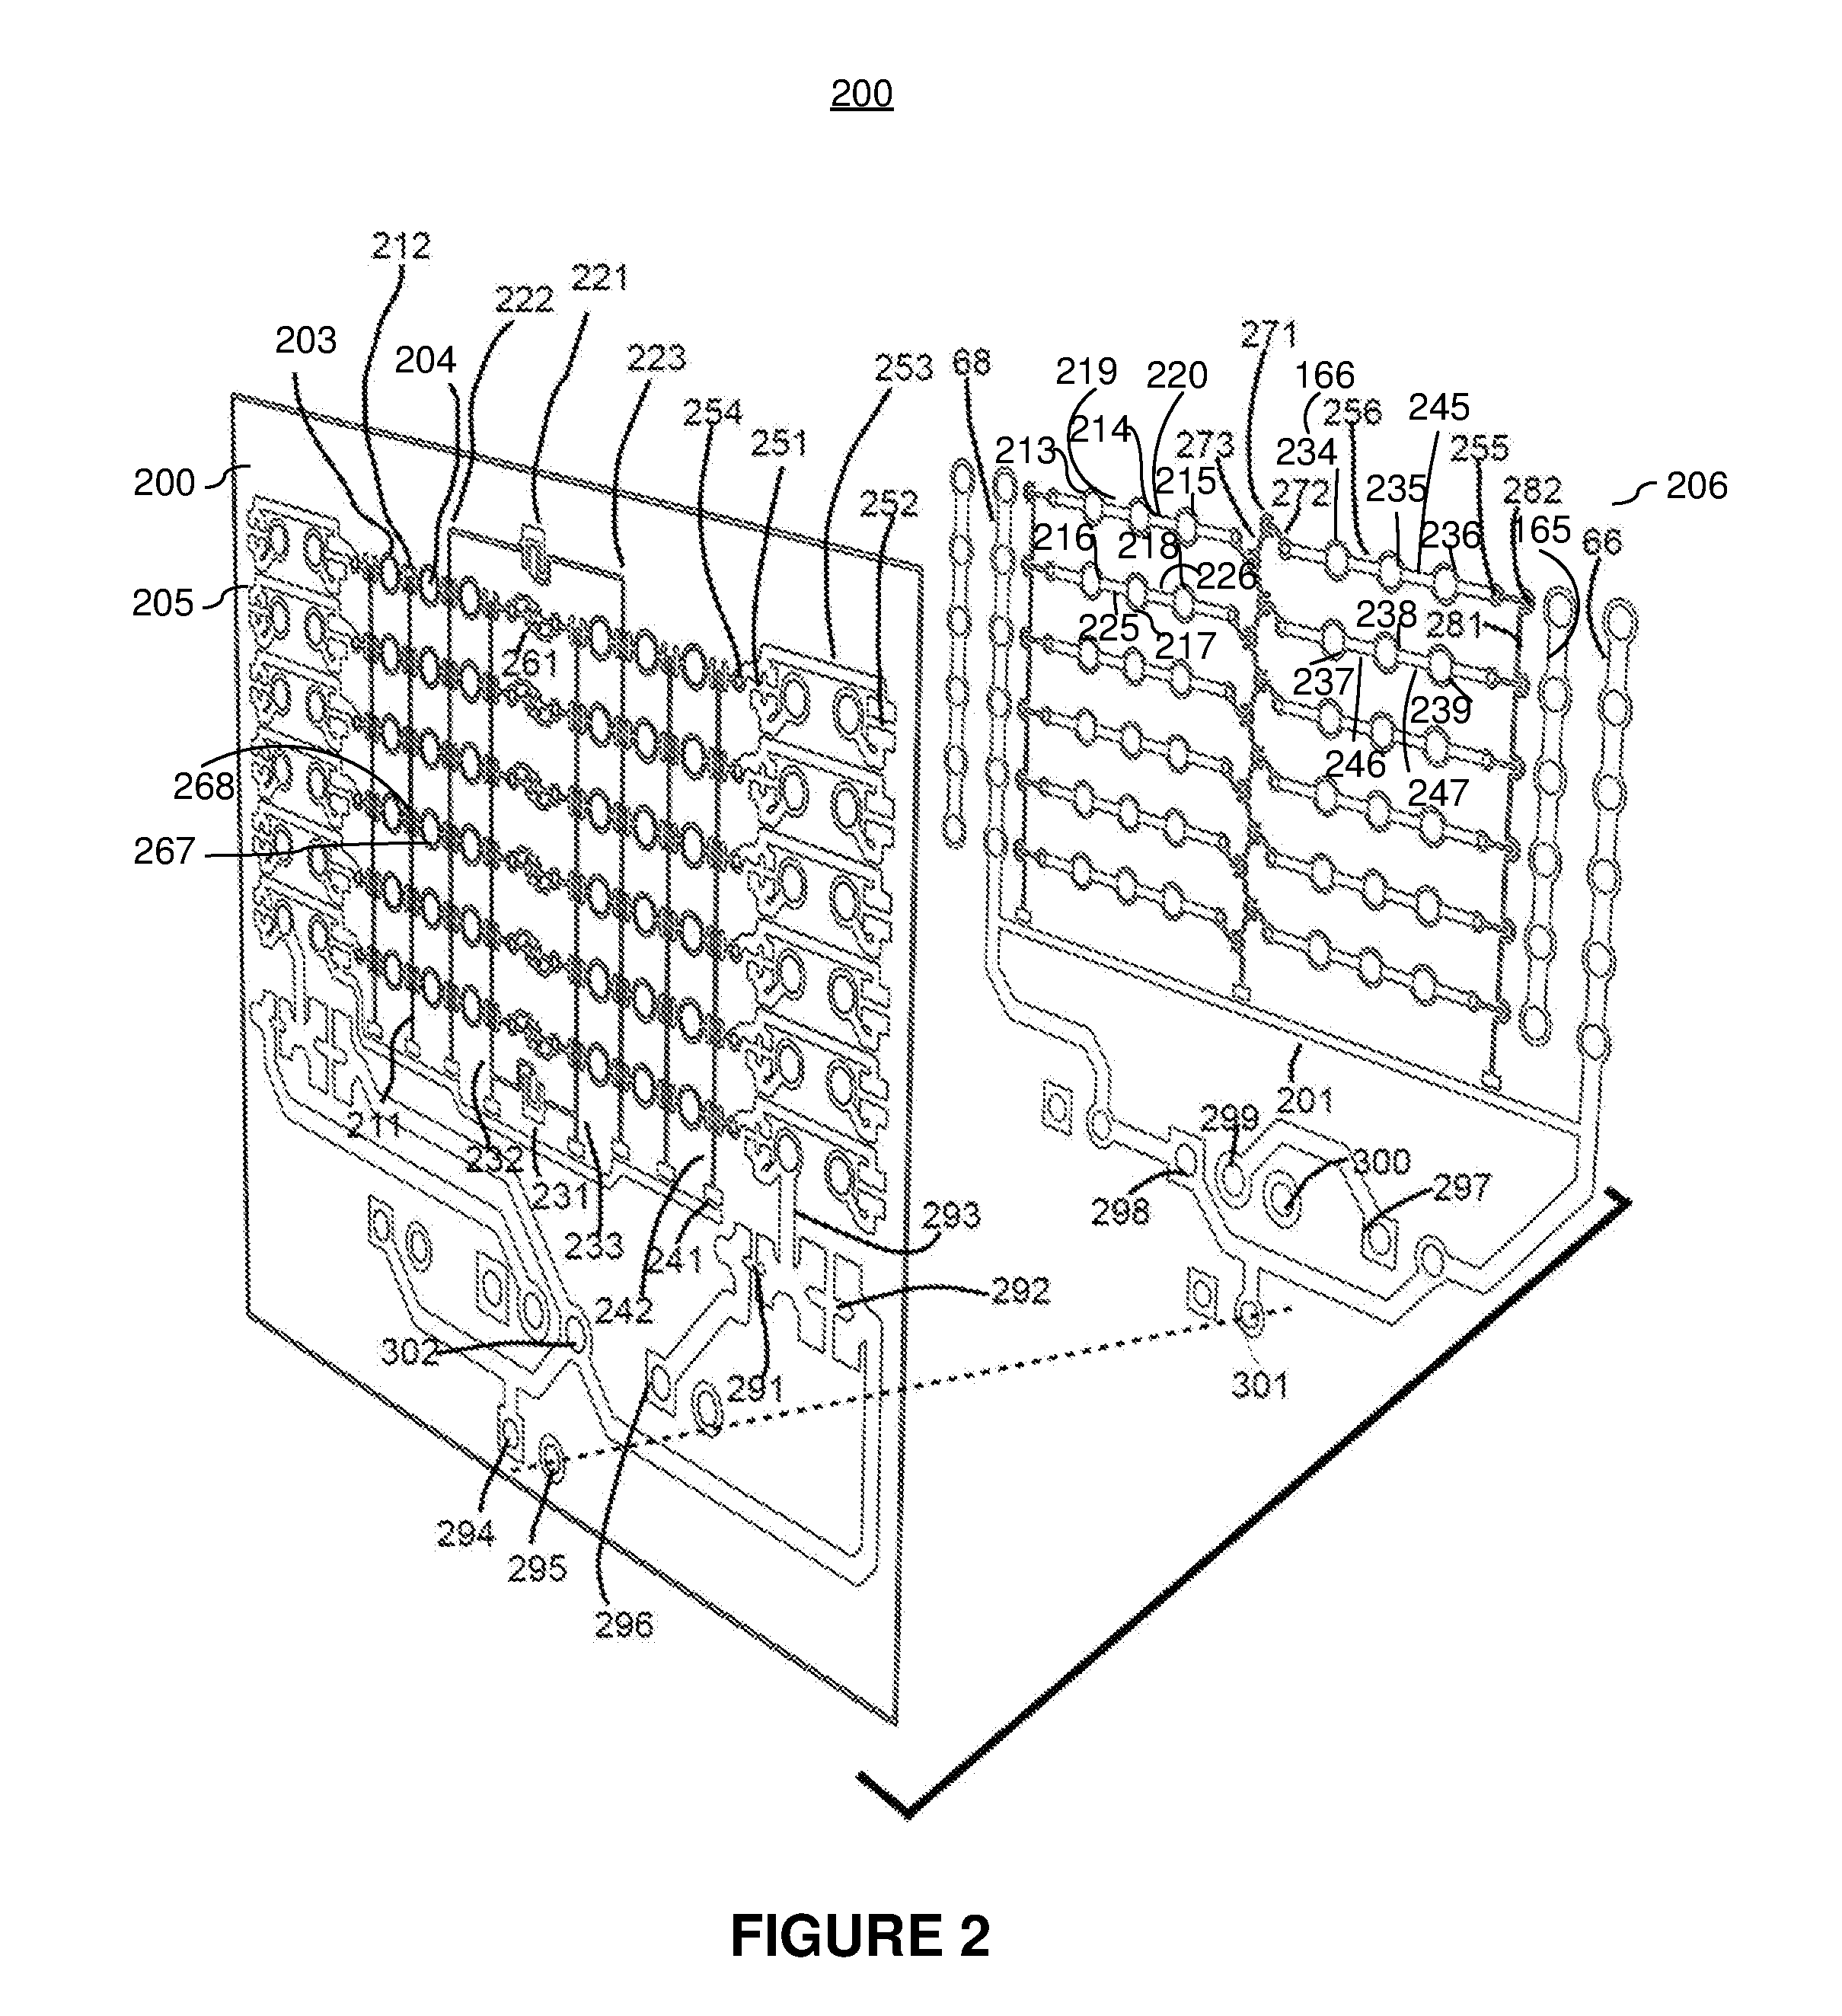 Systems and methods for breadboard sytle printed circuit board